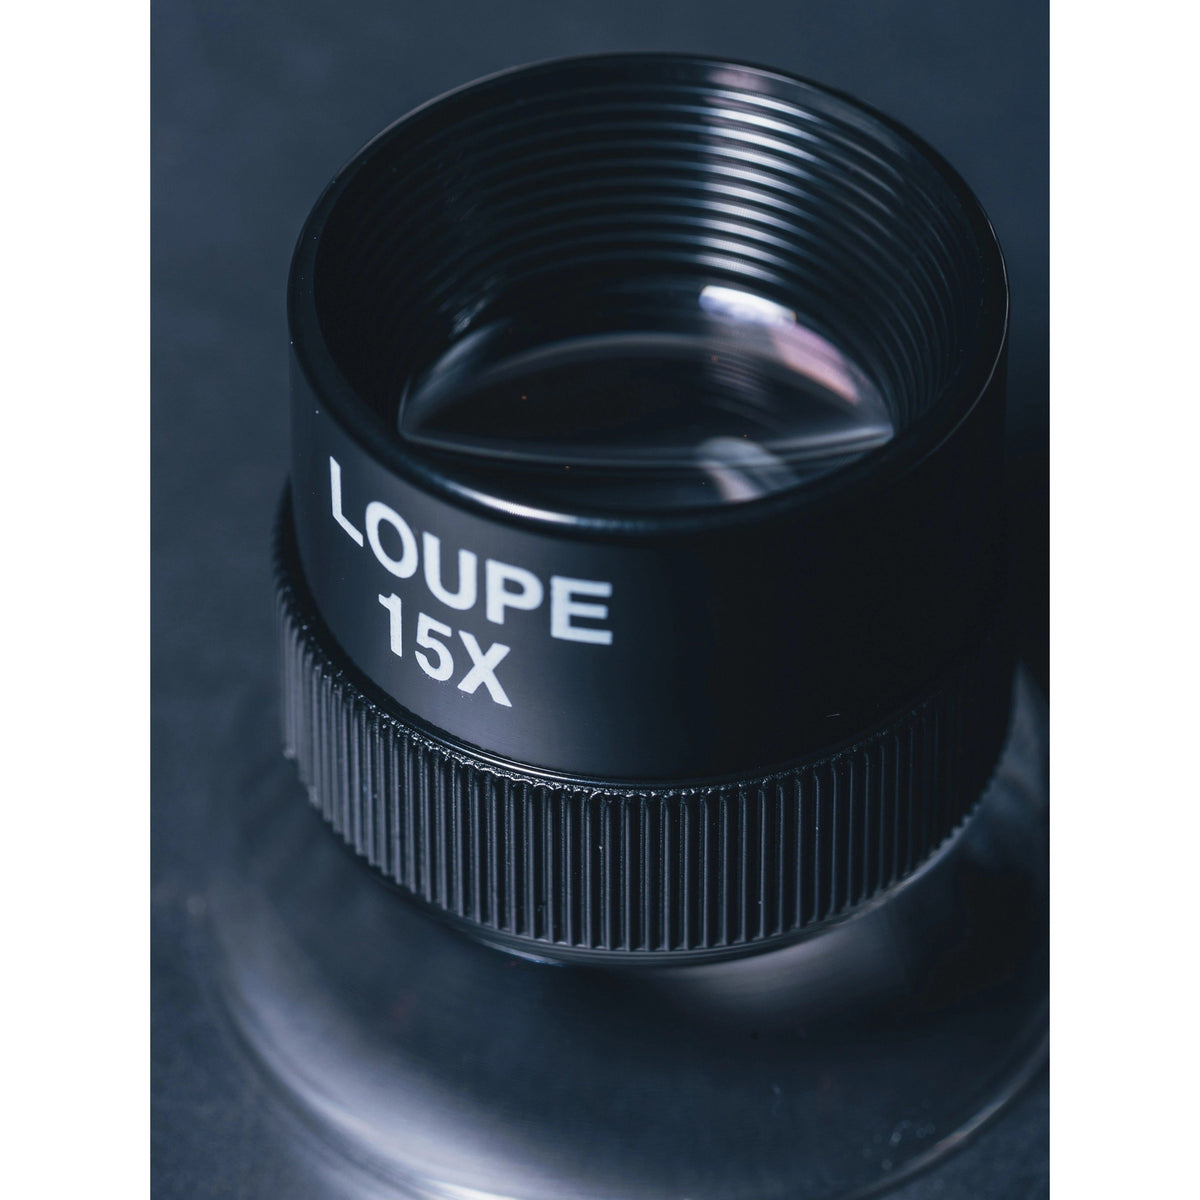 Backcountry Access BCA 15x Magnifying Loupe